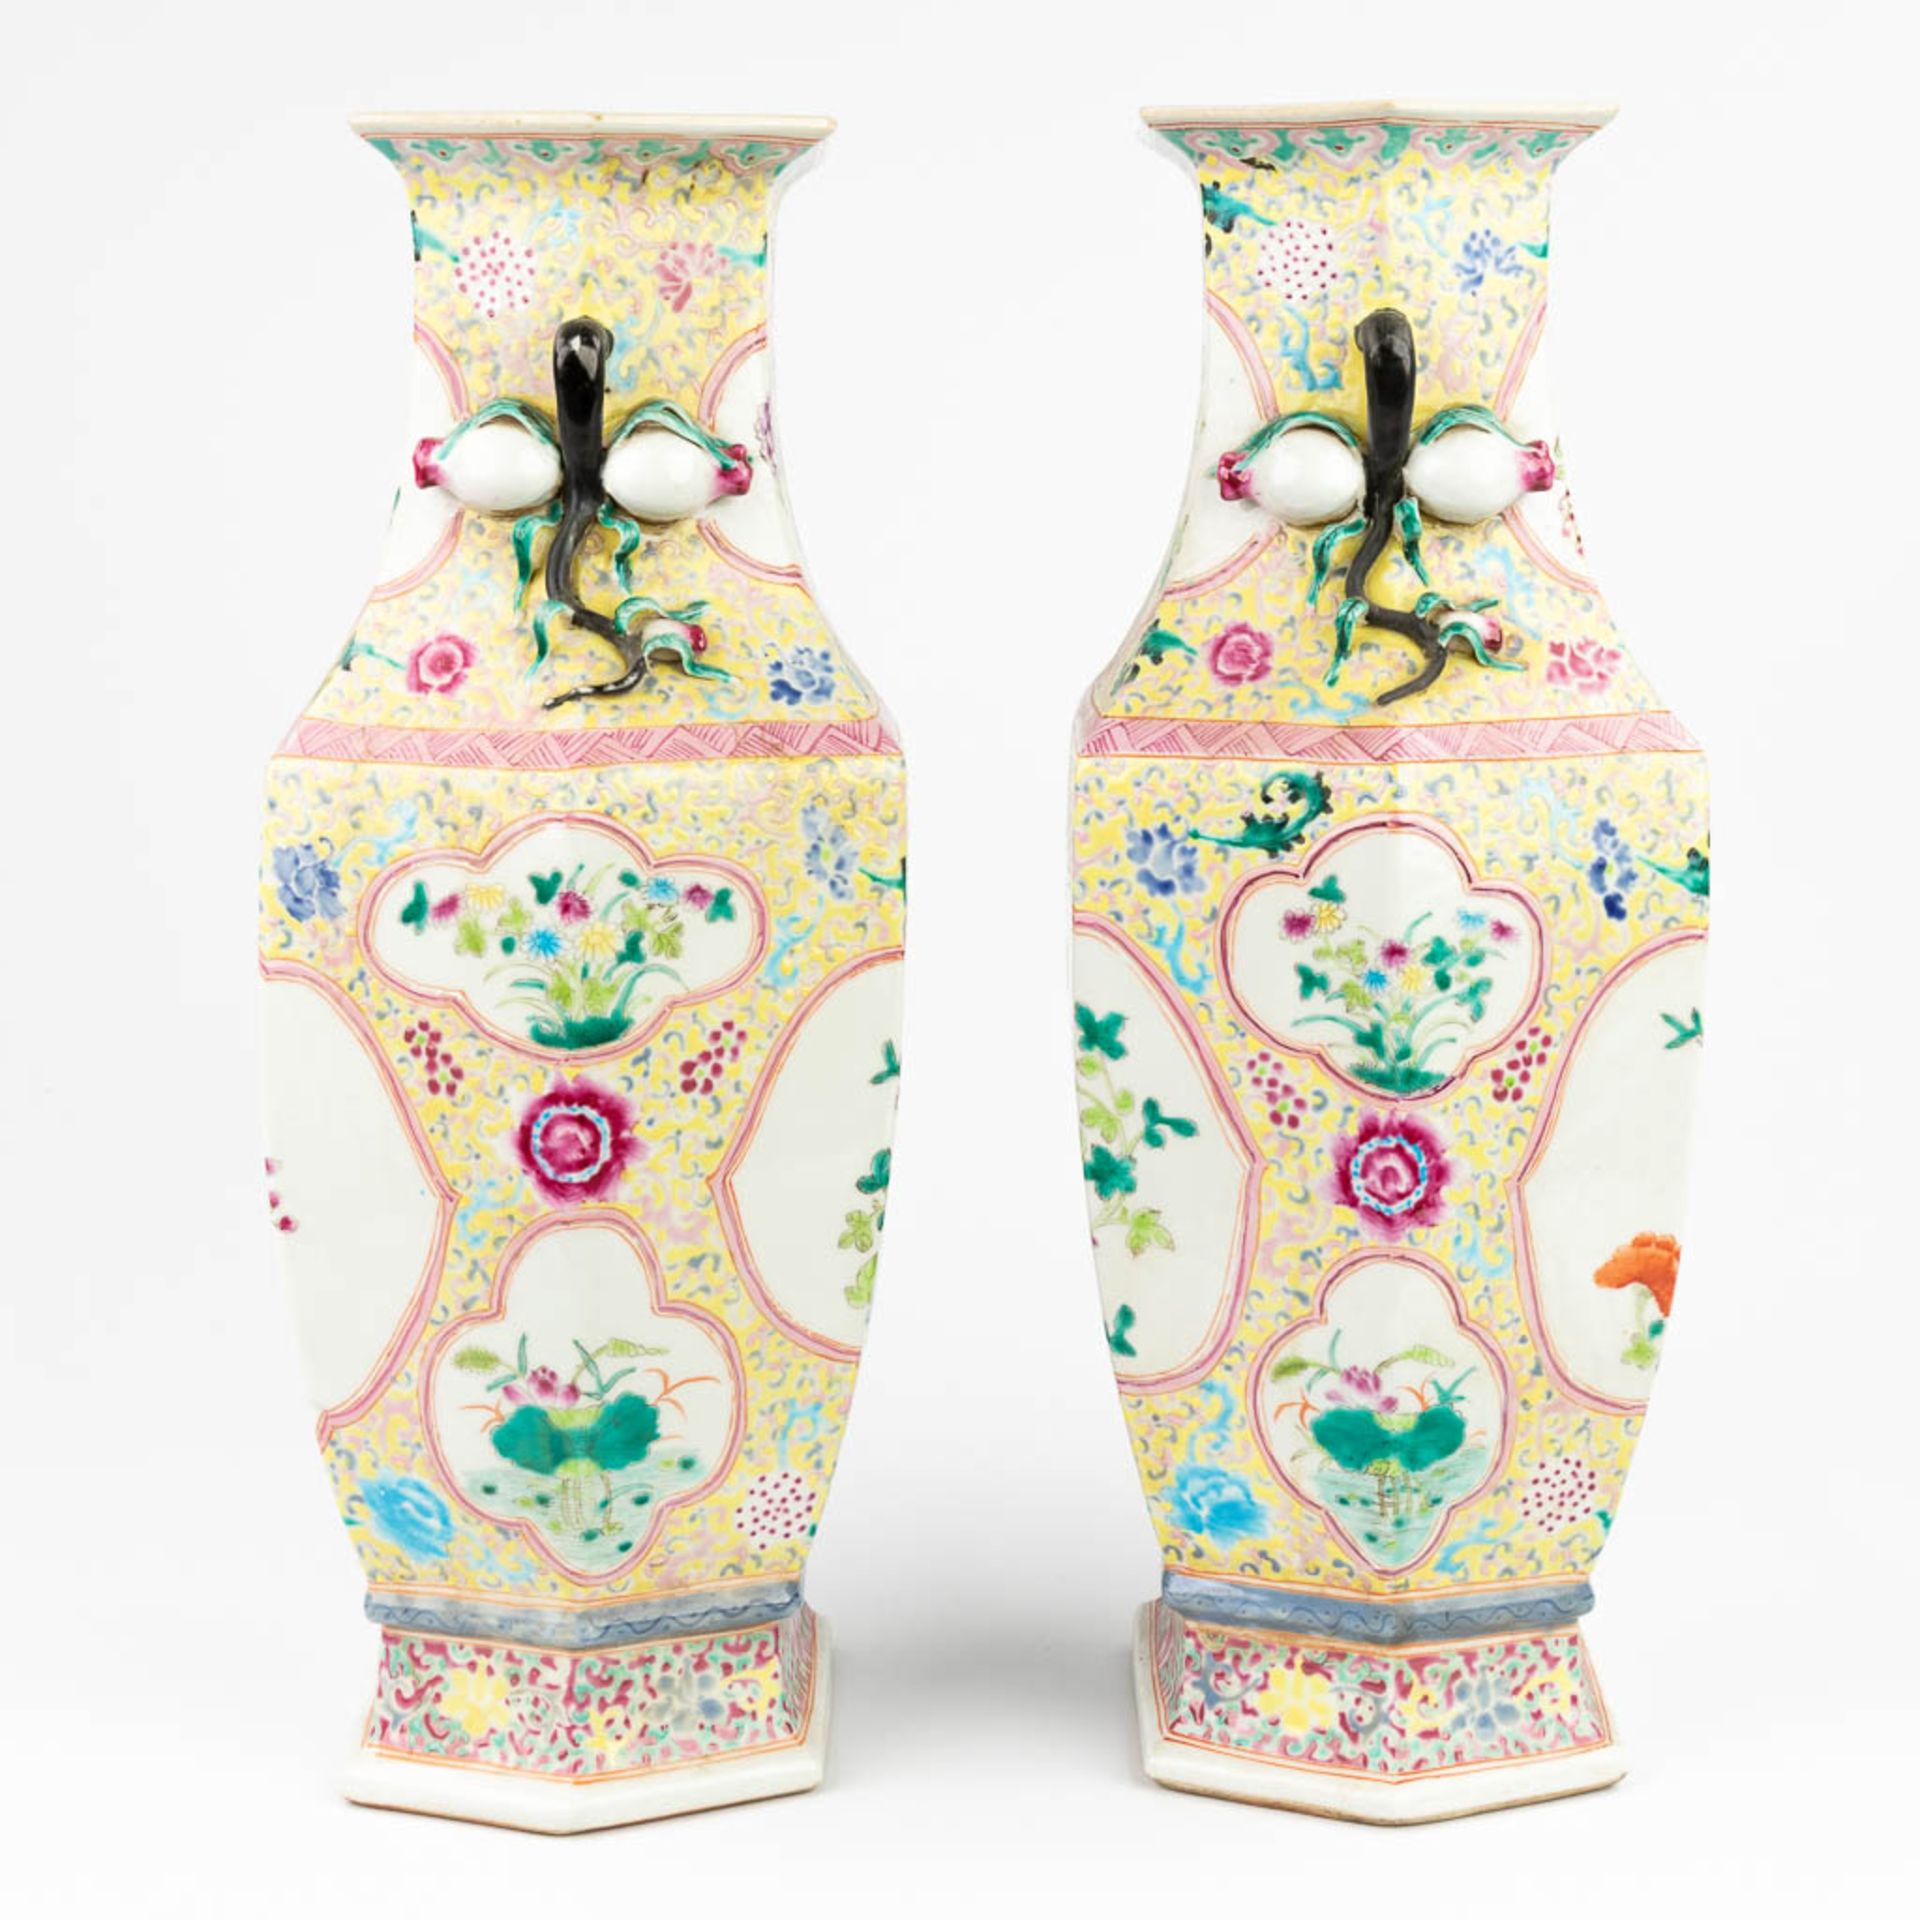 A pair of hexagonal Chinese vases made of porcelain (18 x 22 x 46 cm) - Image 8 of 17